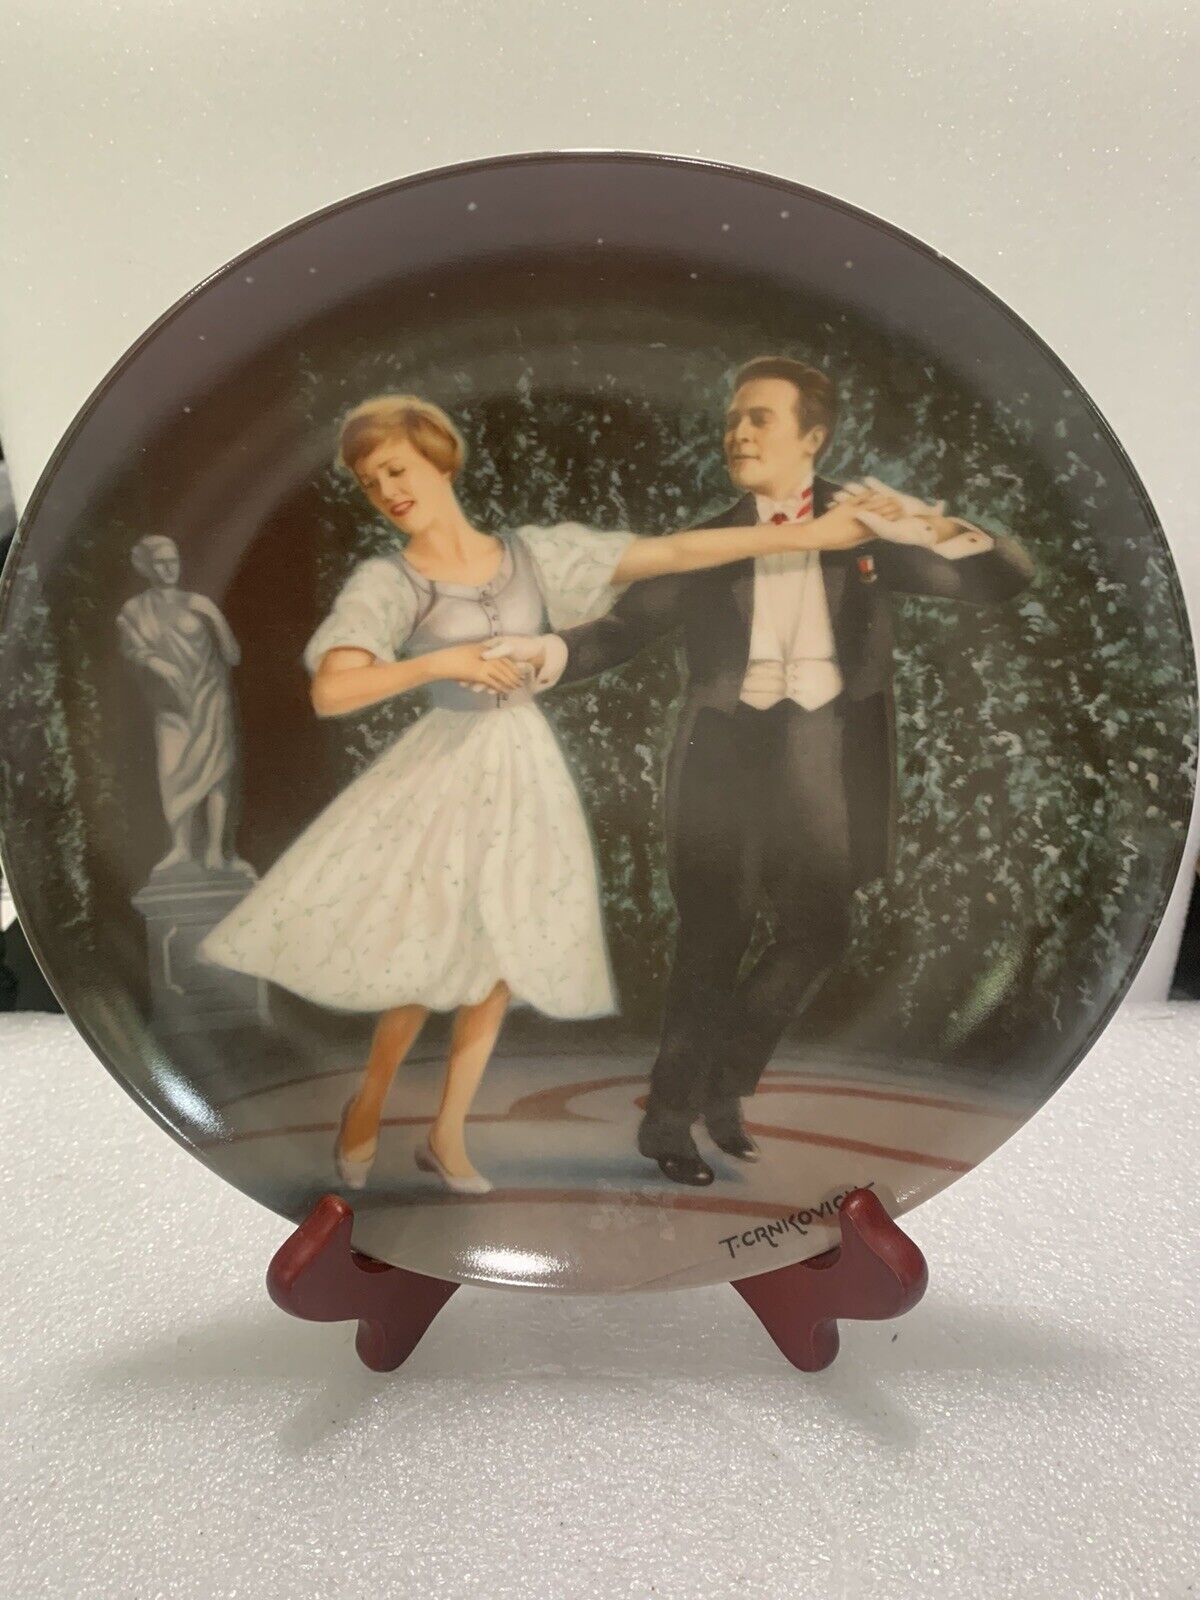 Knowles The Sound Of Music Collector Plate “Laendler\